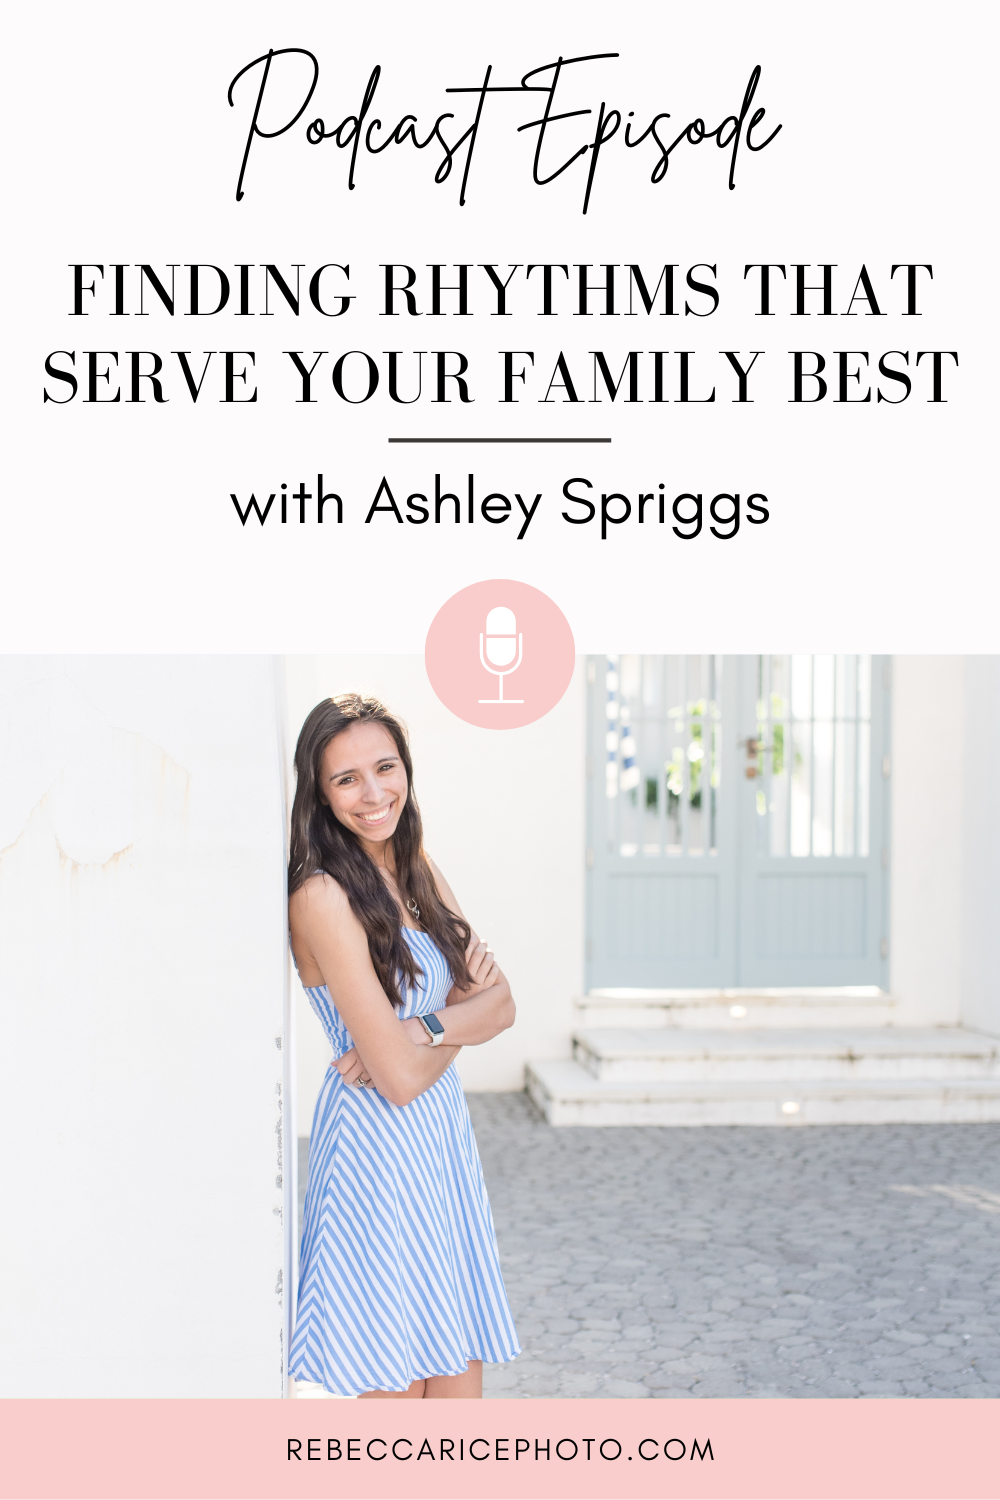 Finding rhythms that serve your family best with Ashley Spriggs